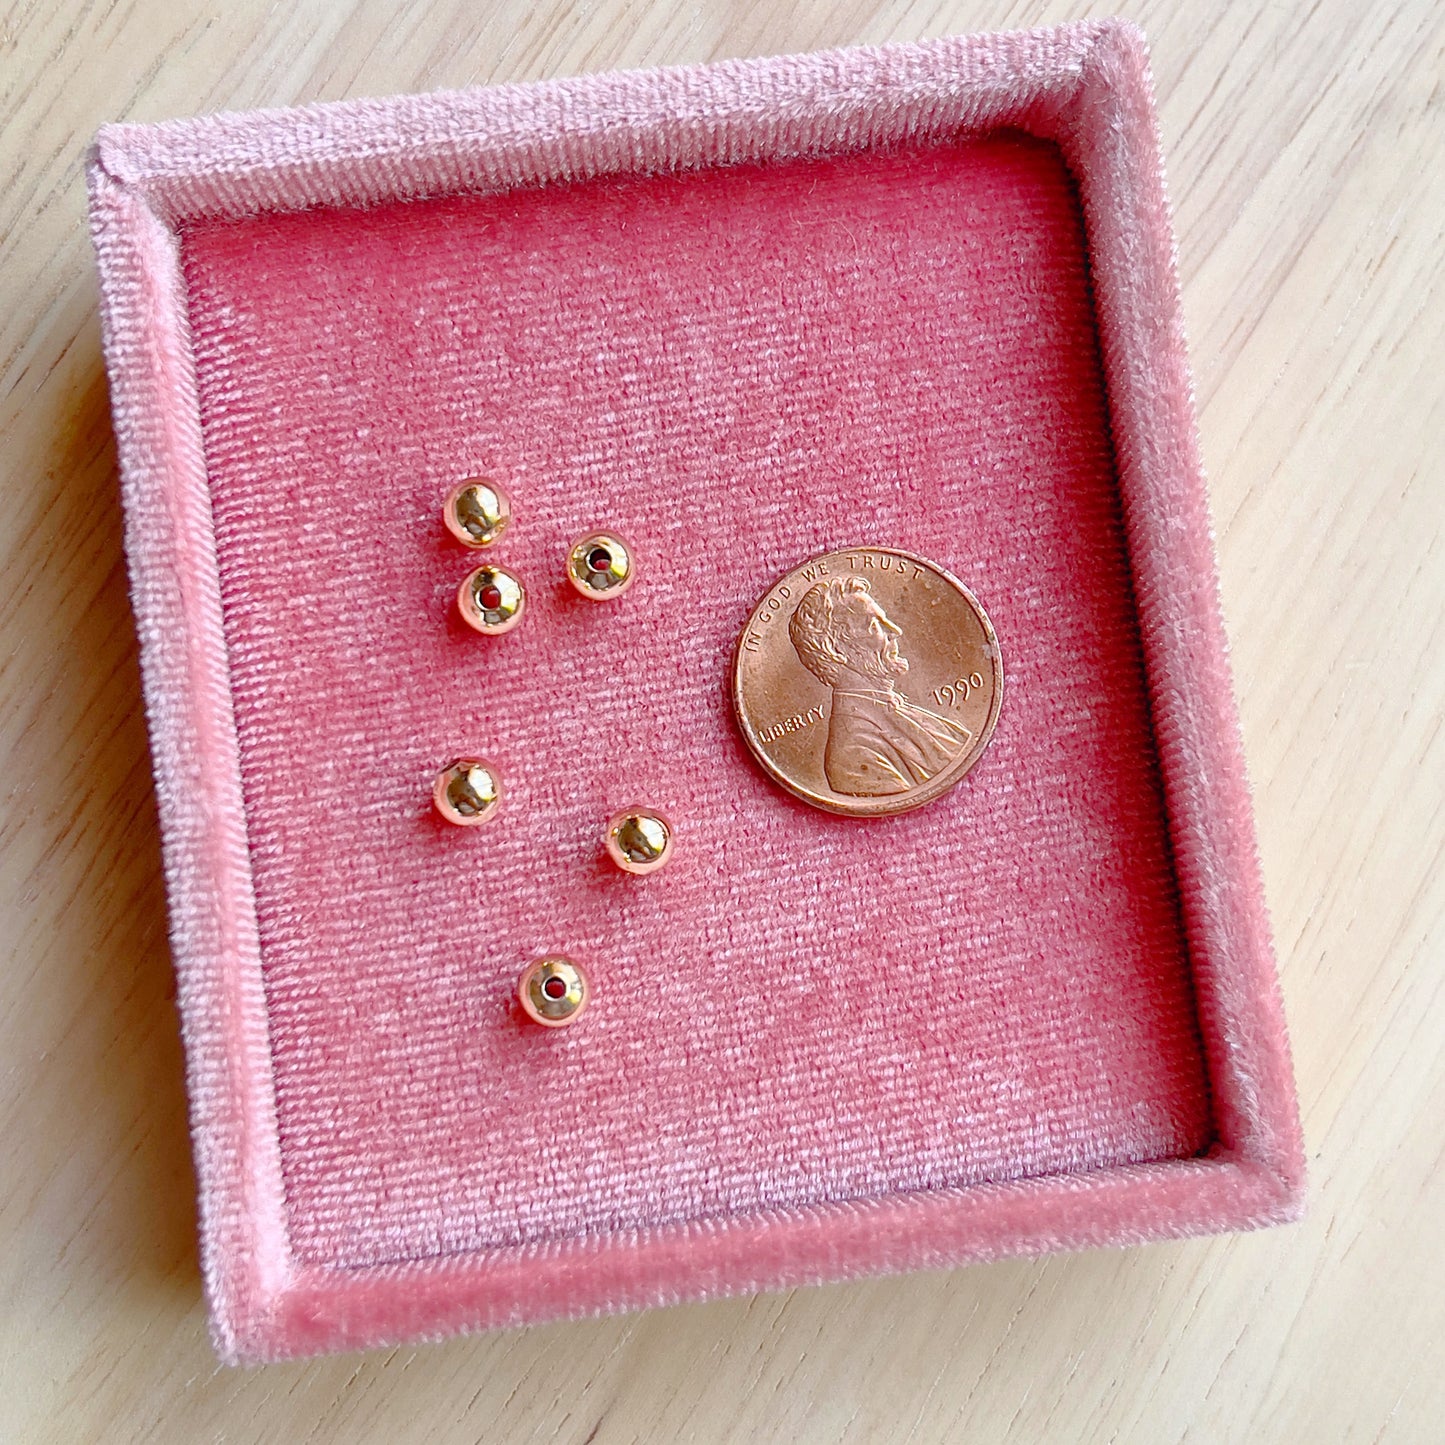 5mm Gold Plated spacer beads